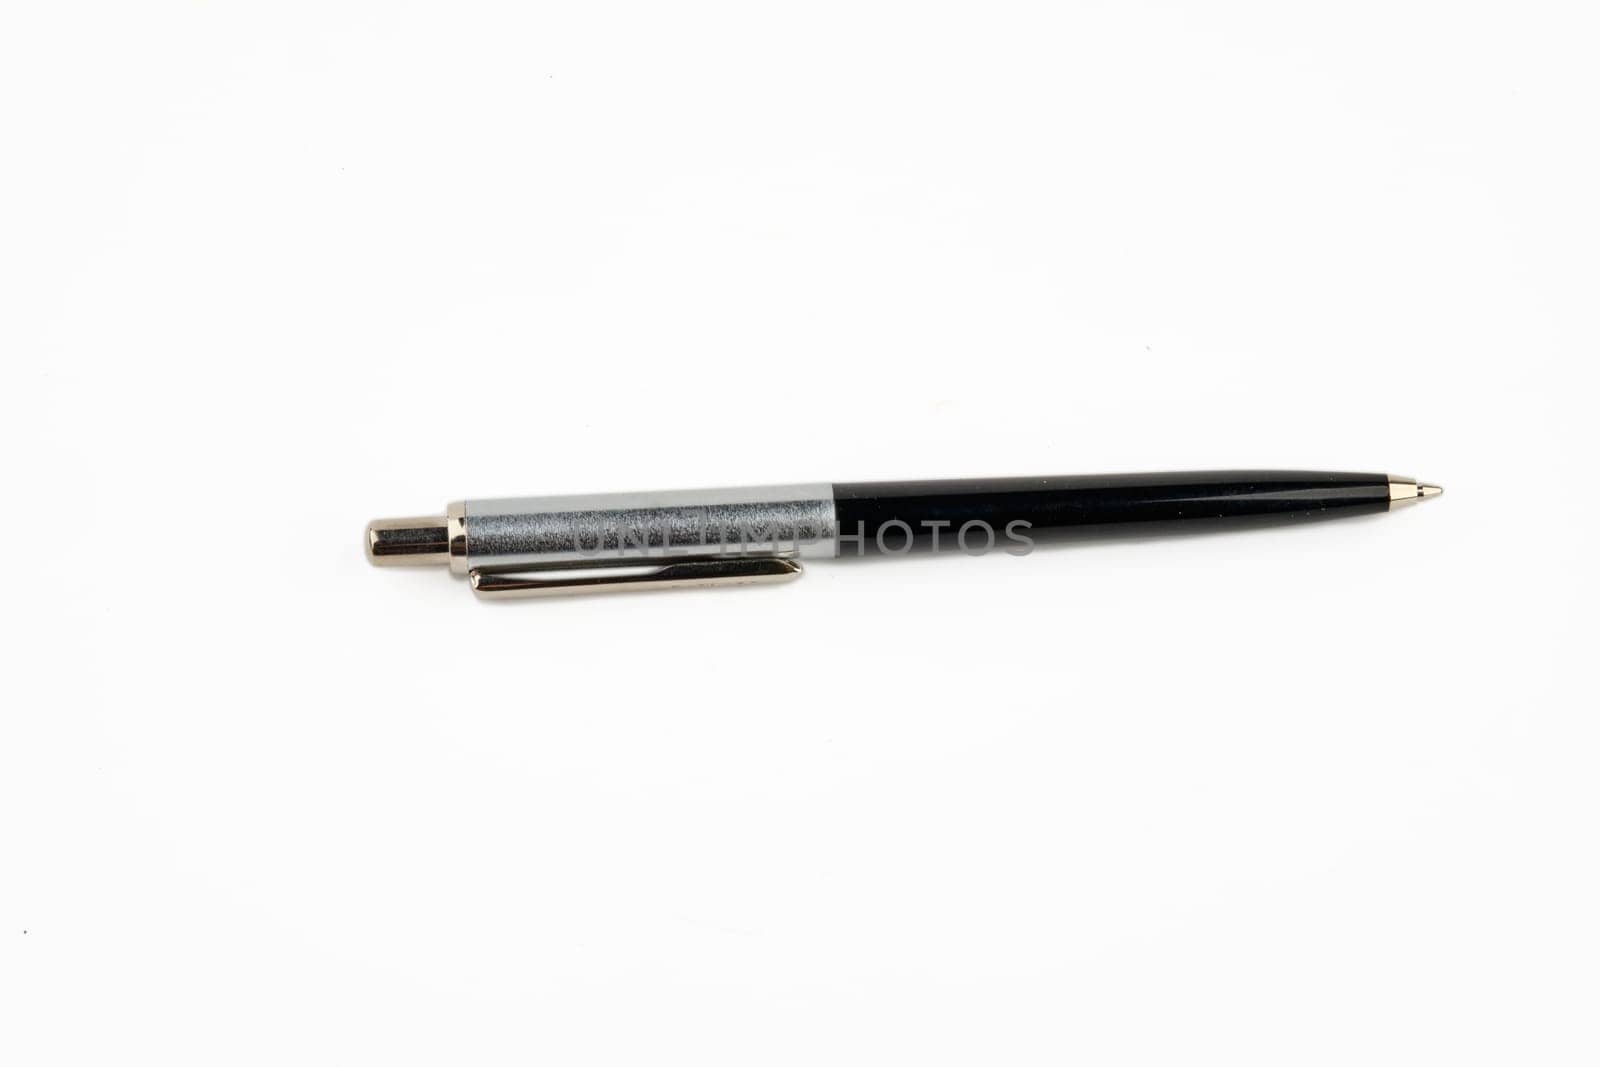 A pen highlighted on a white background with a ballpoint tip